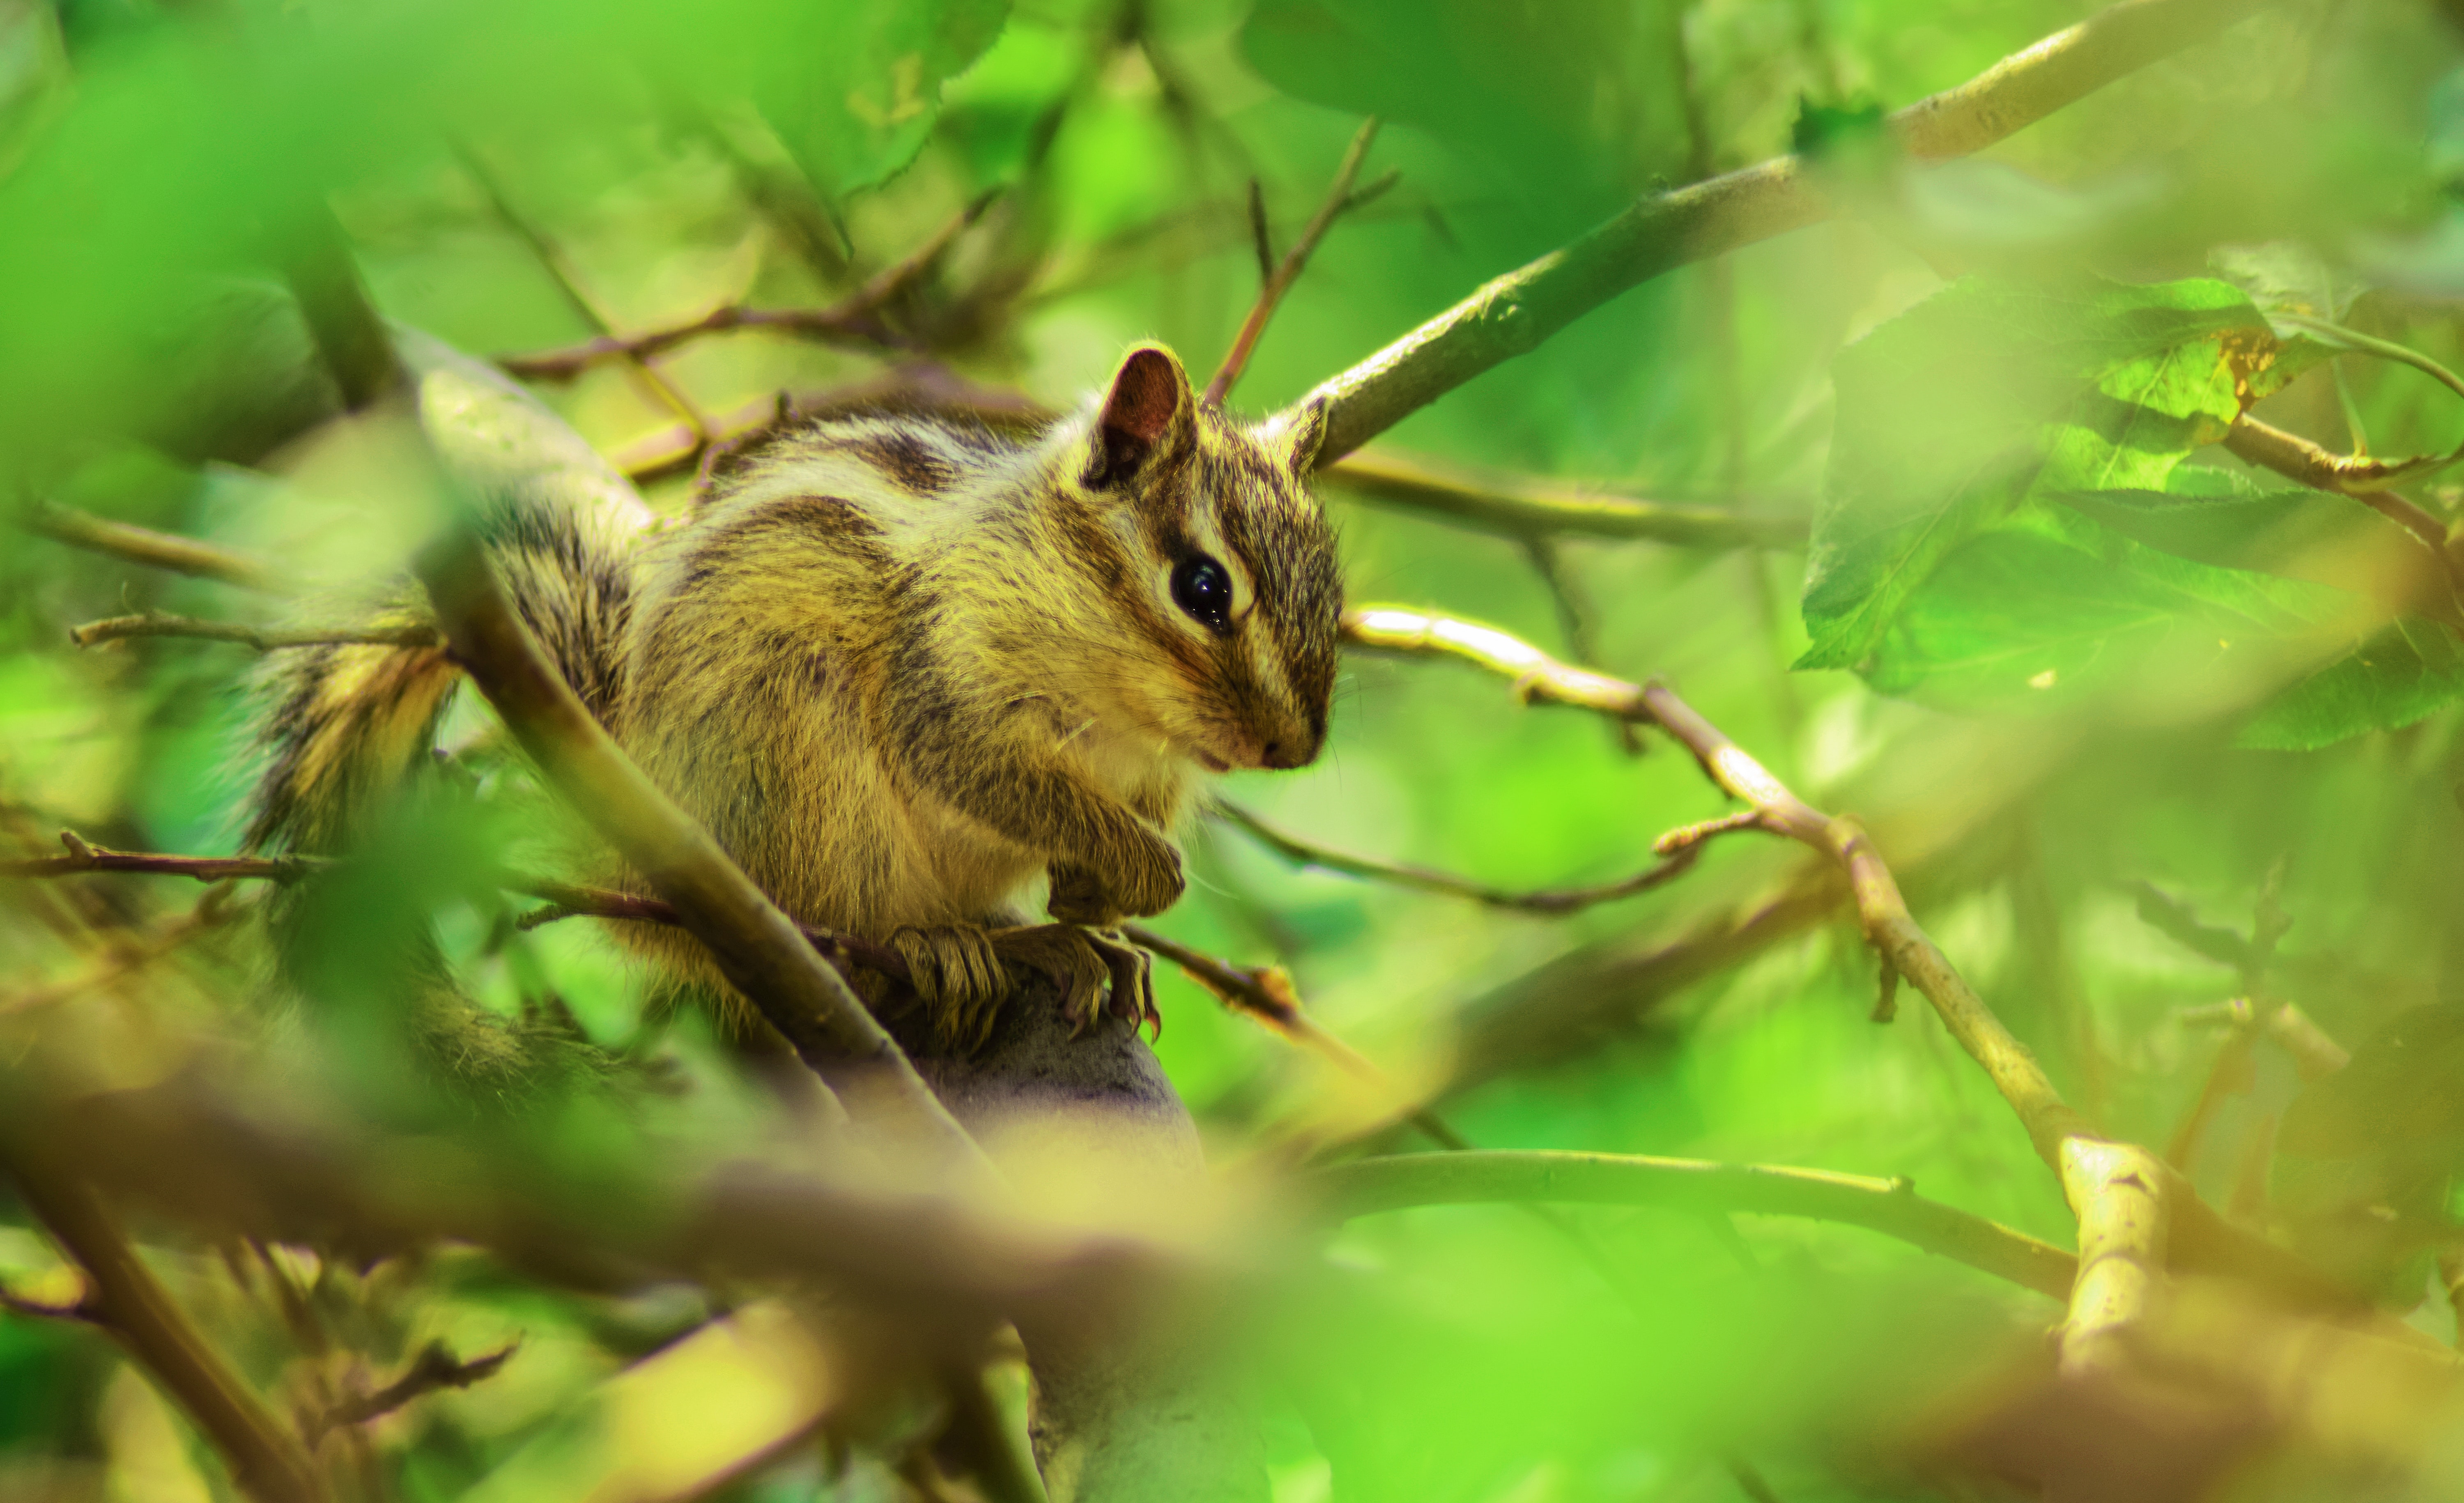 Brown squirrel perched on tree branch in selective focus photography